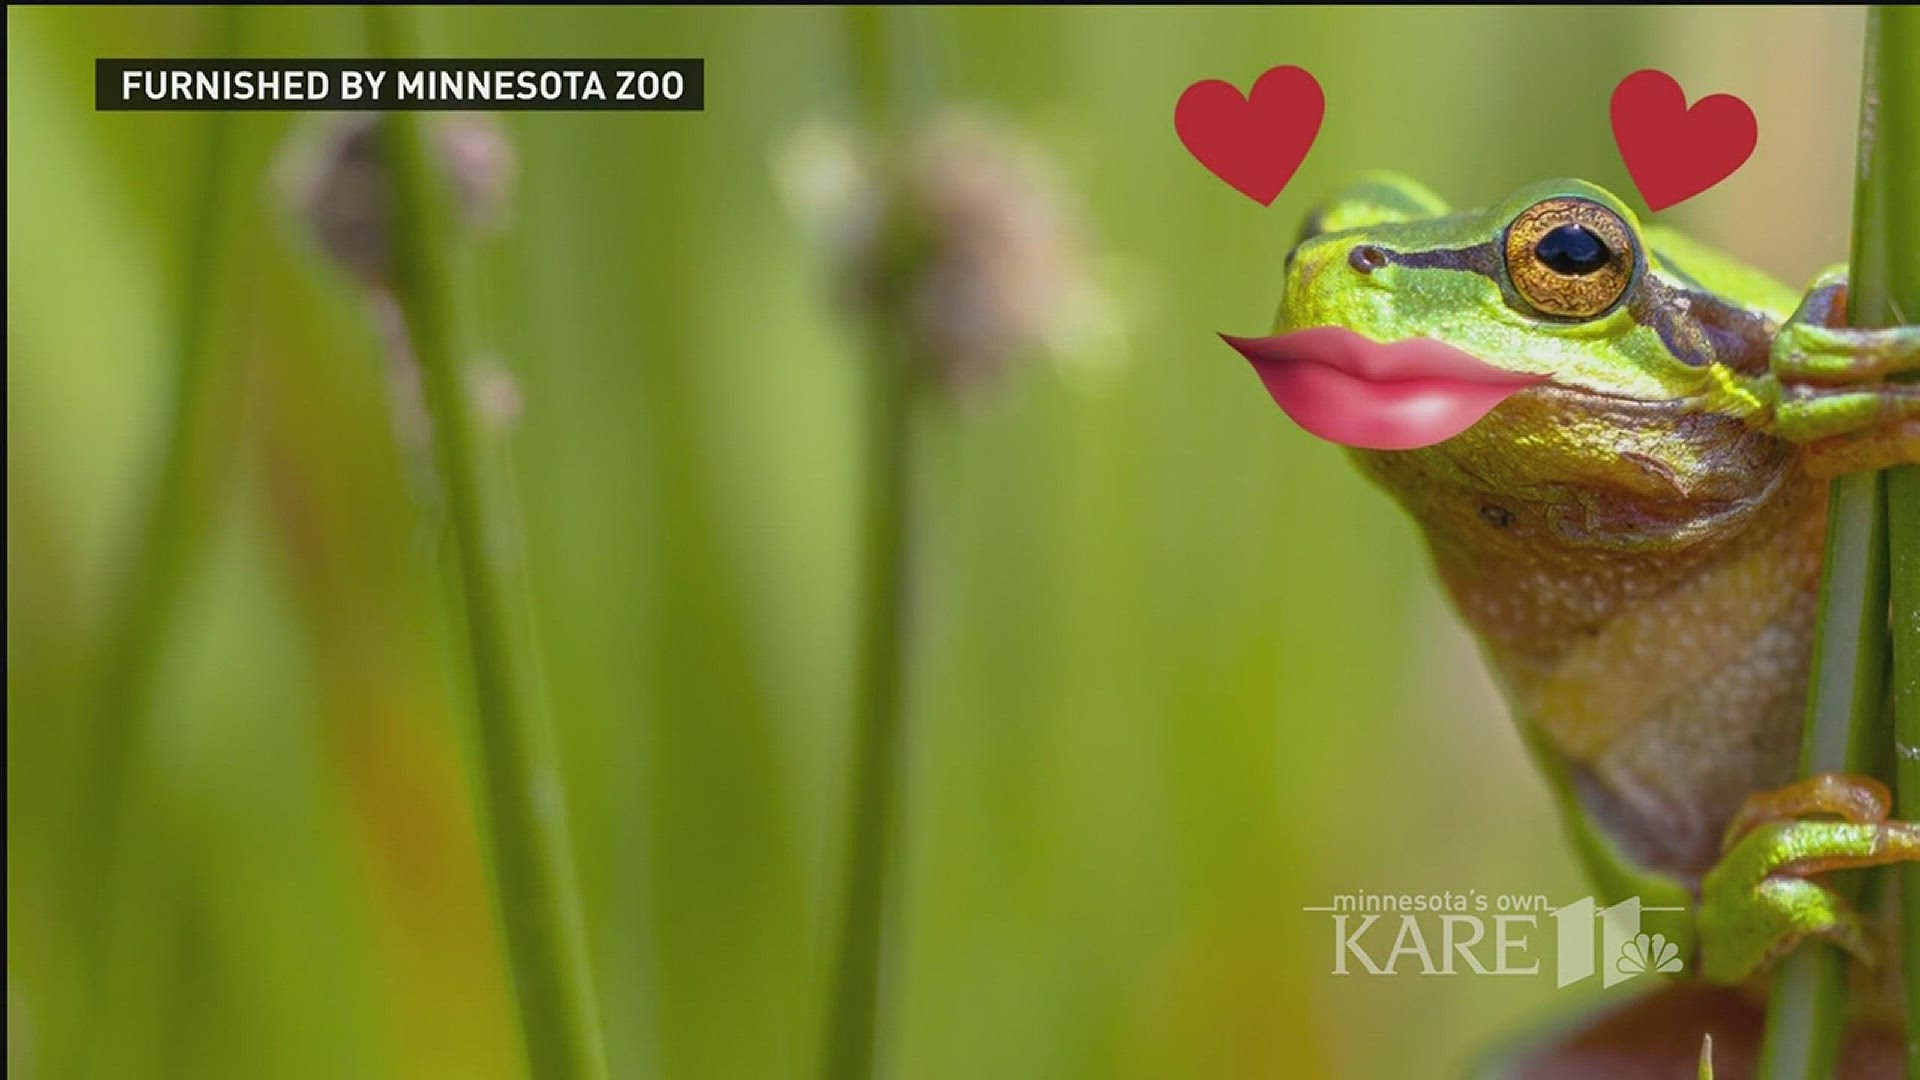 Send a virtual frog kiss from MN Zoo